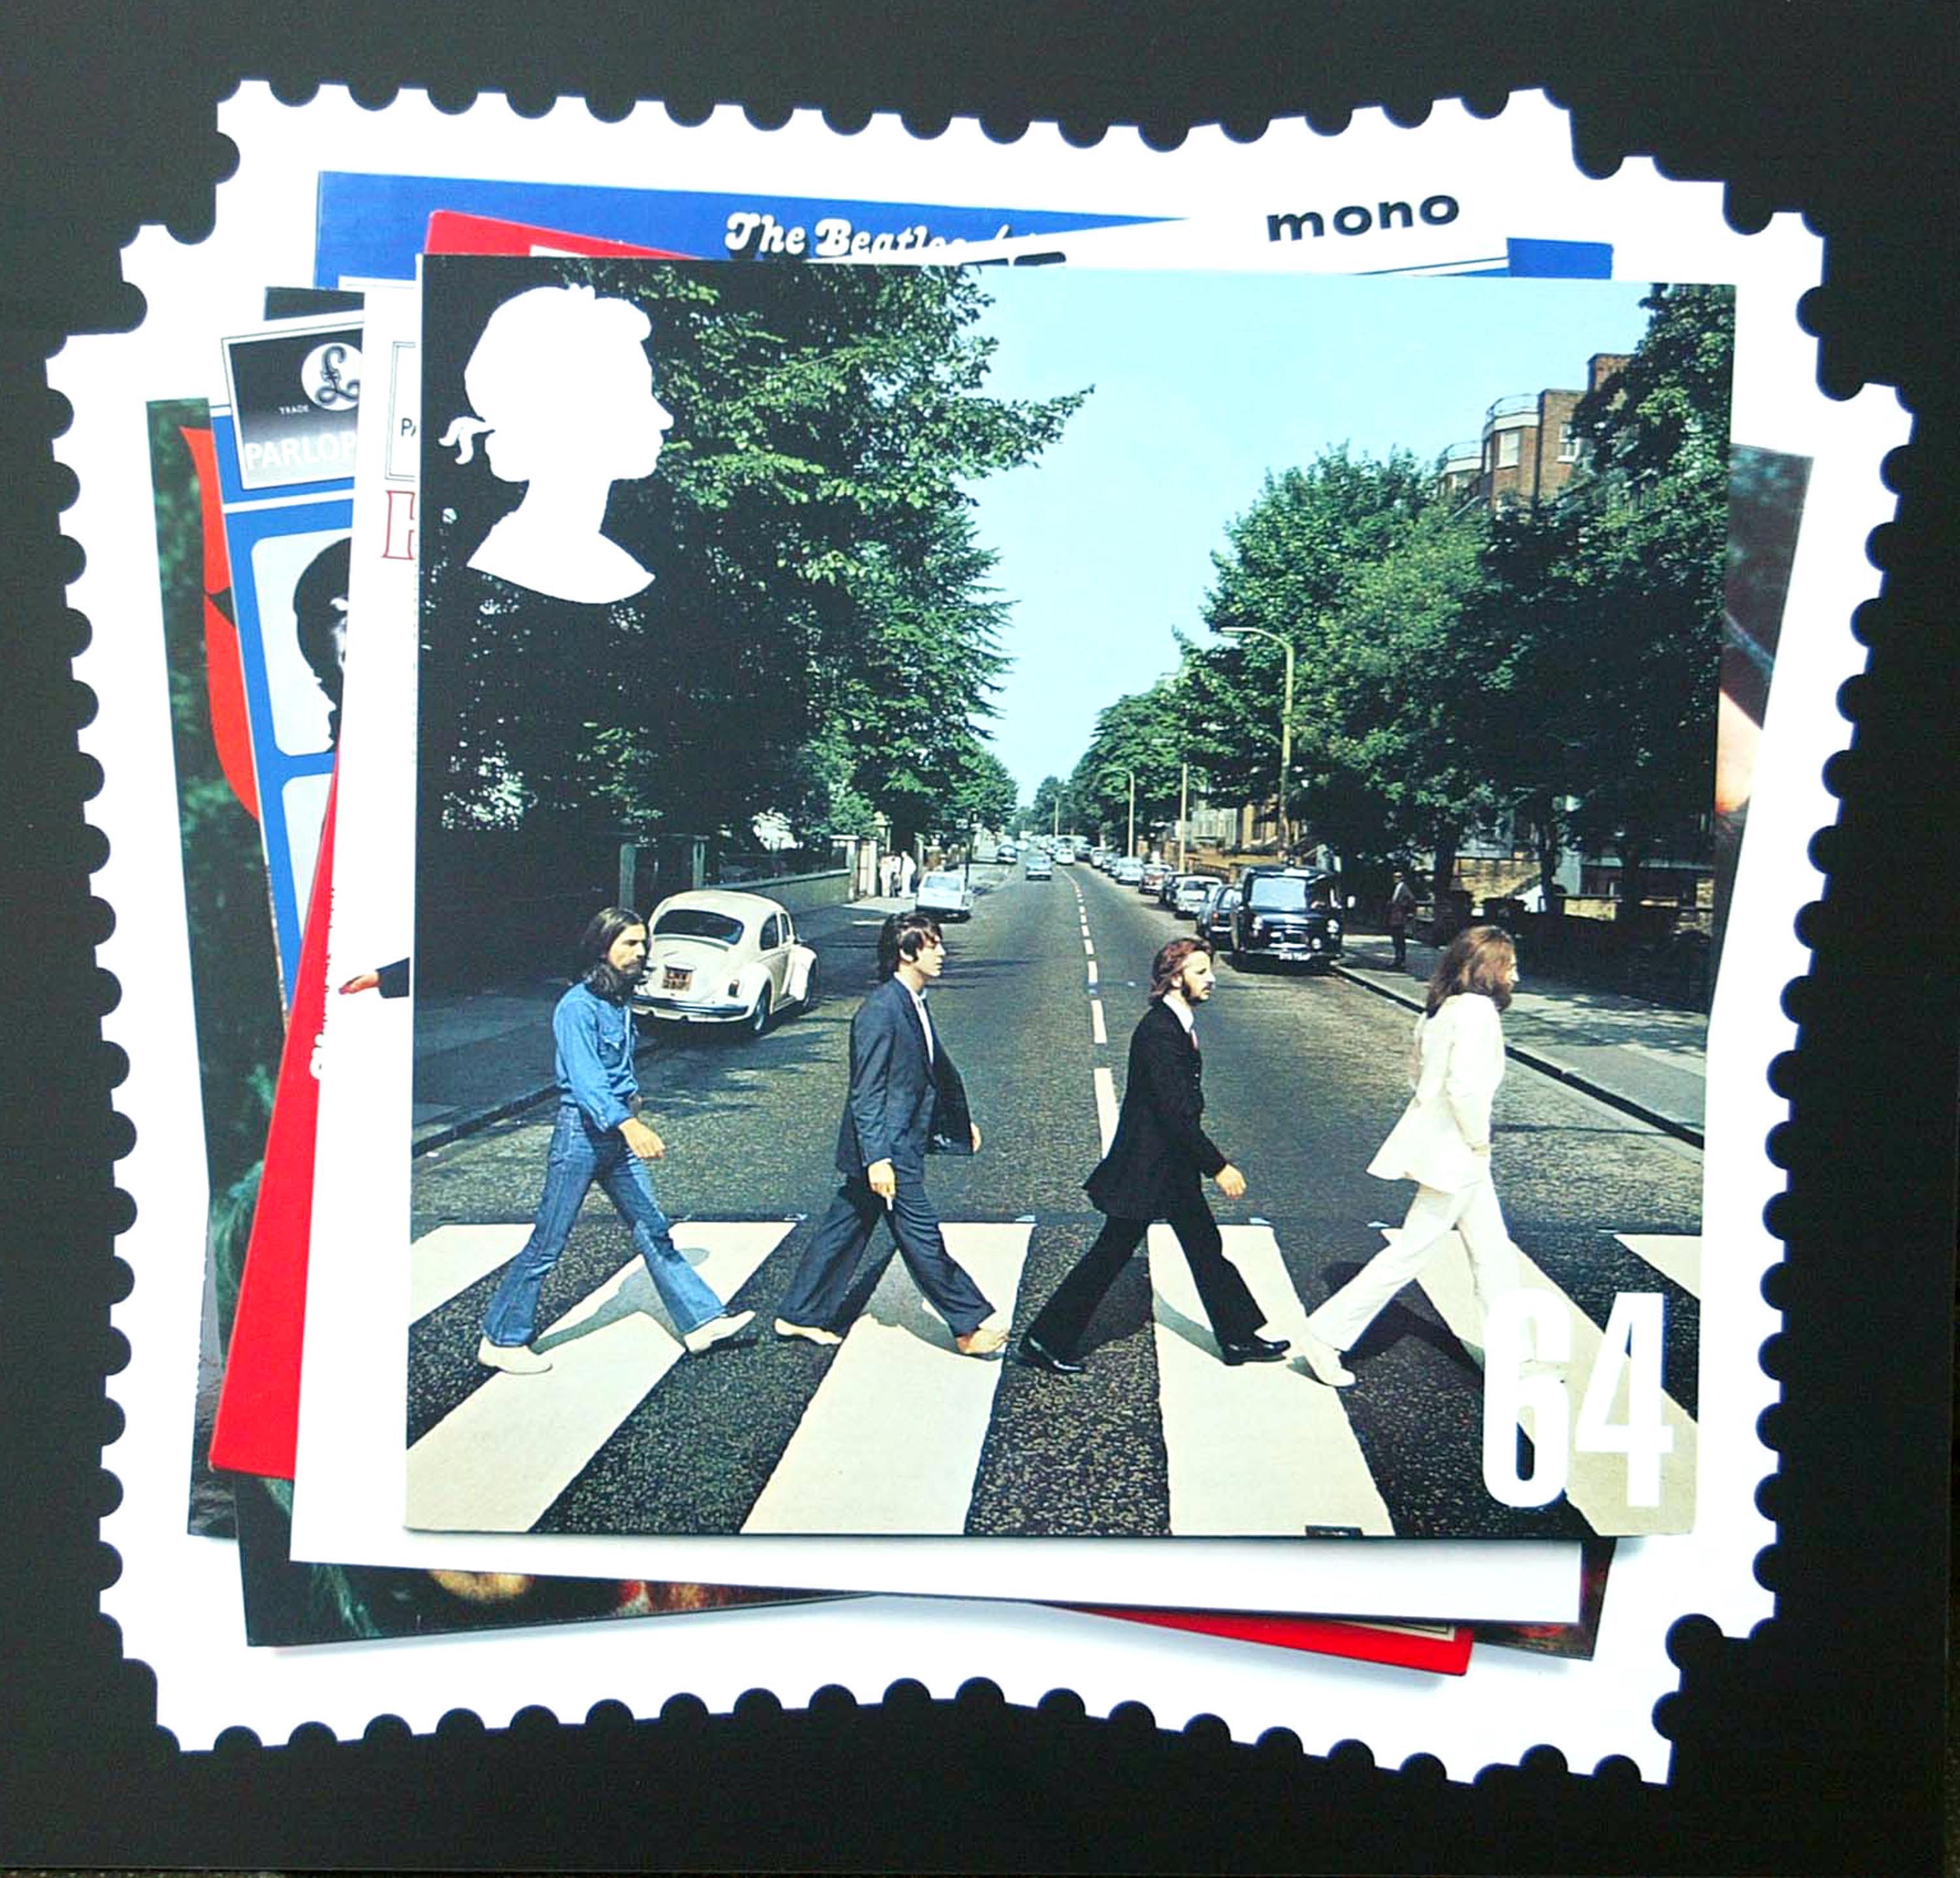 How The Beatles Iconic Abbey Road Album Cover Came Together In Just 15 Minutes